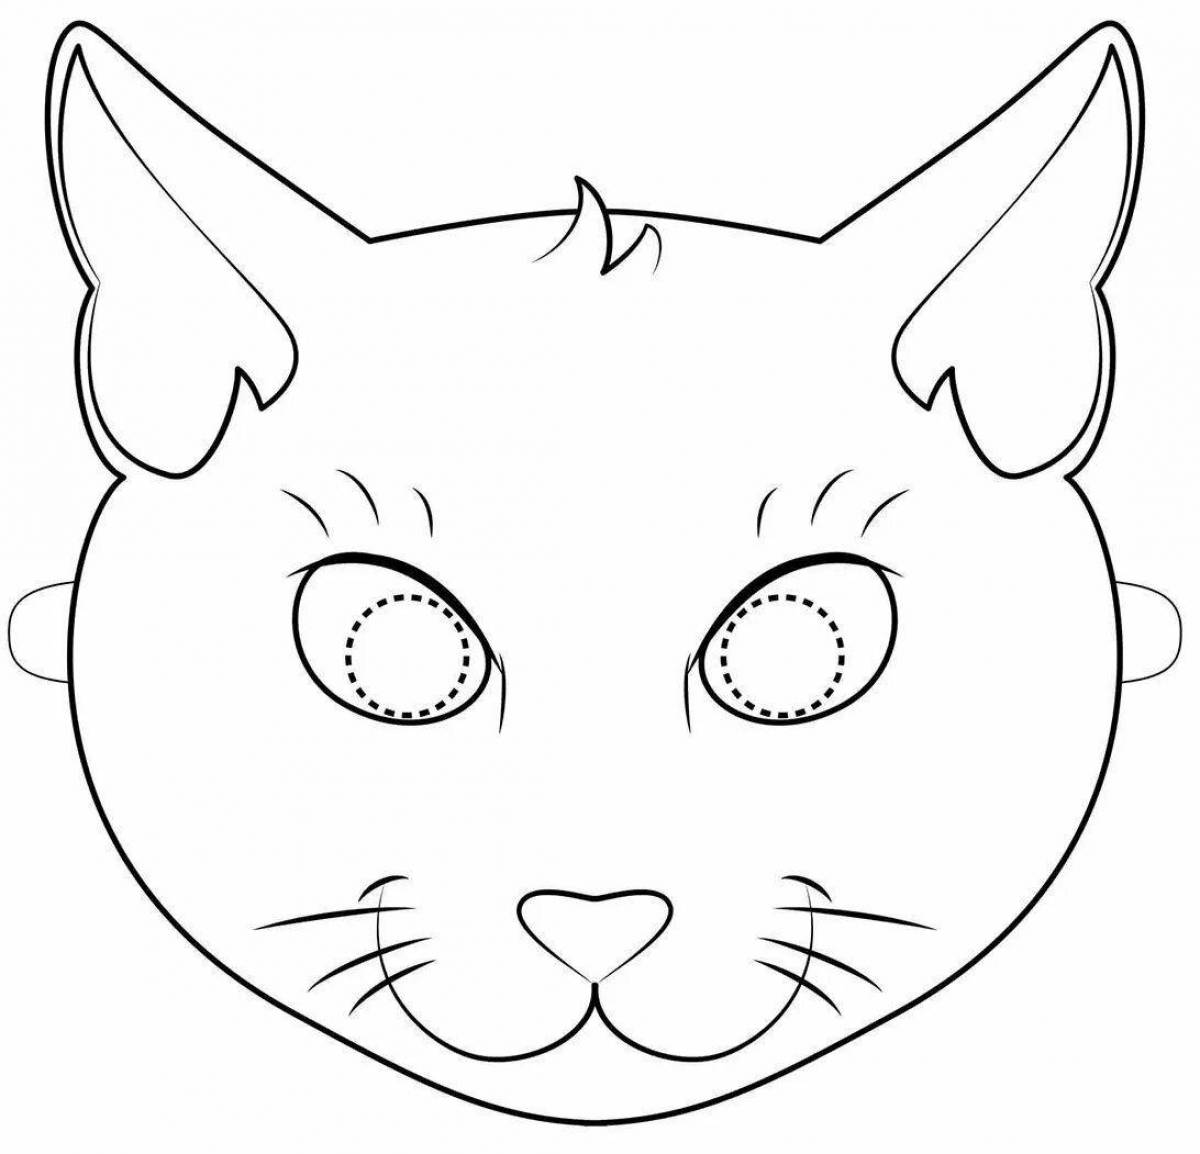 Coloring page happy cat face